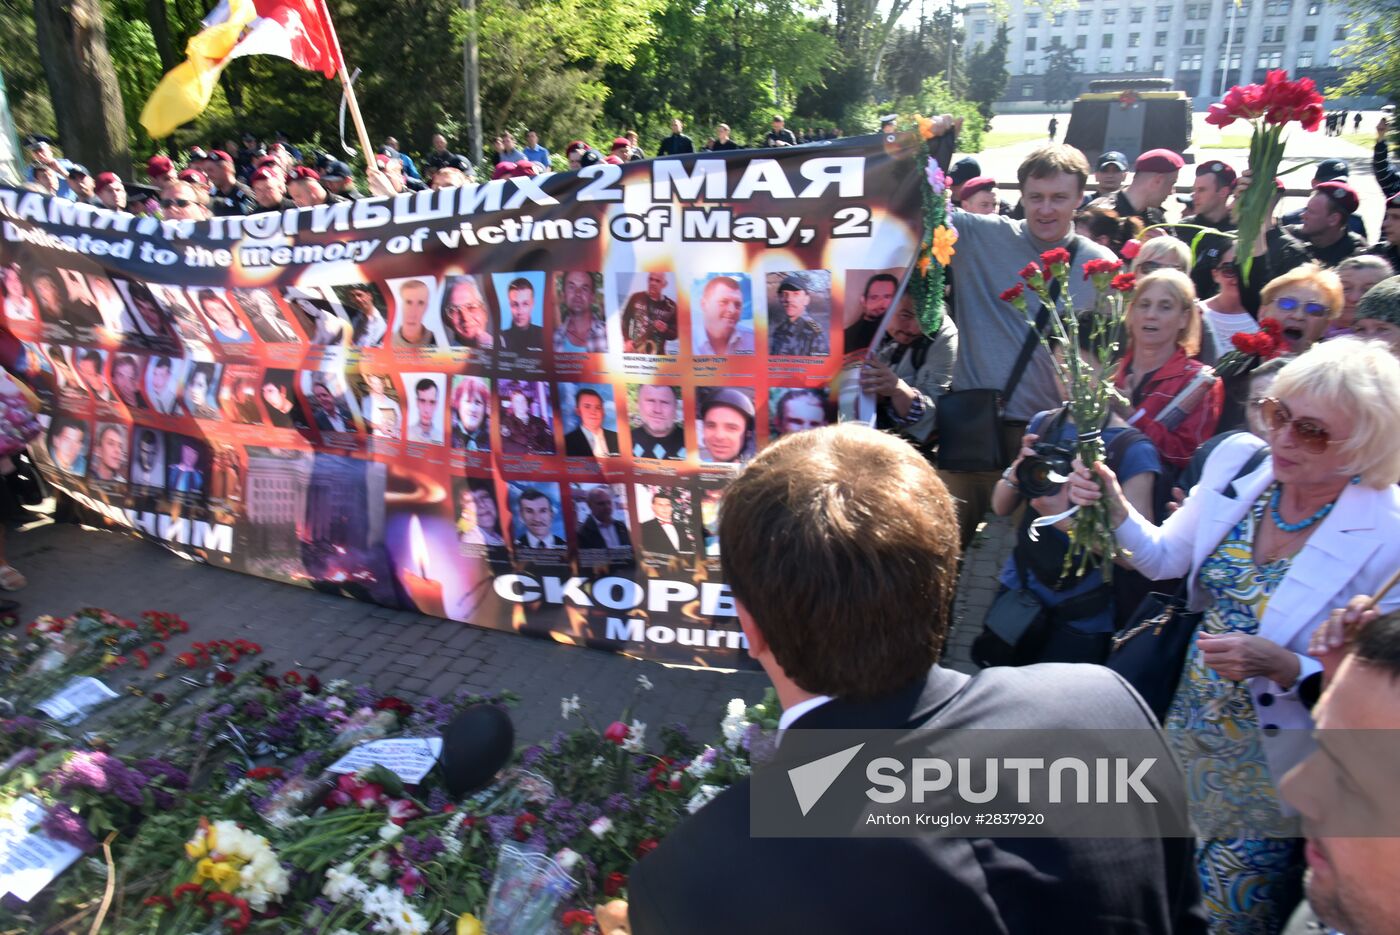 Rally commemorates those killed in Odessa clashes on May 2, 2014